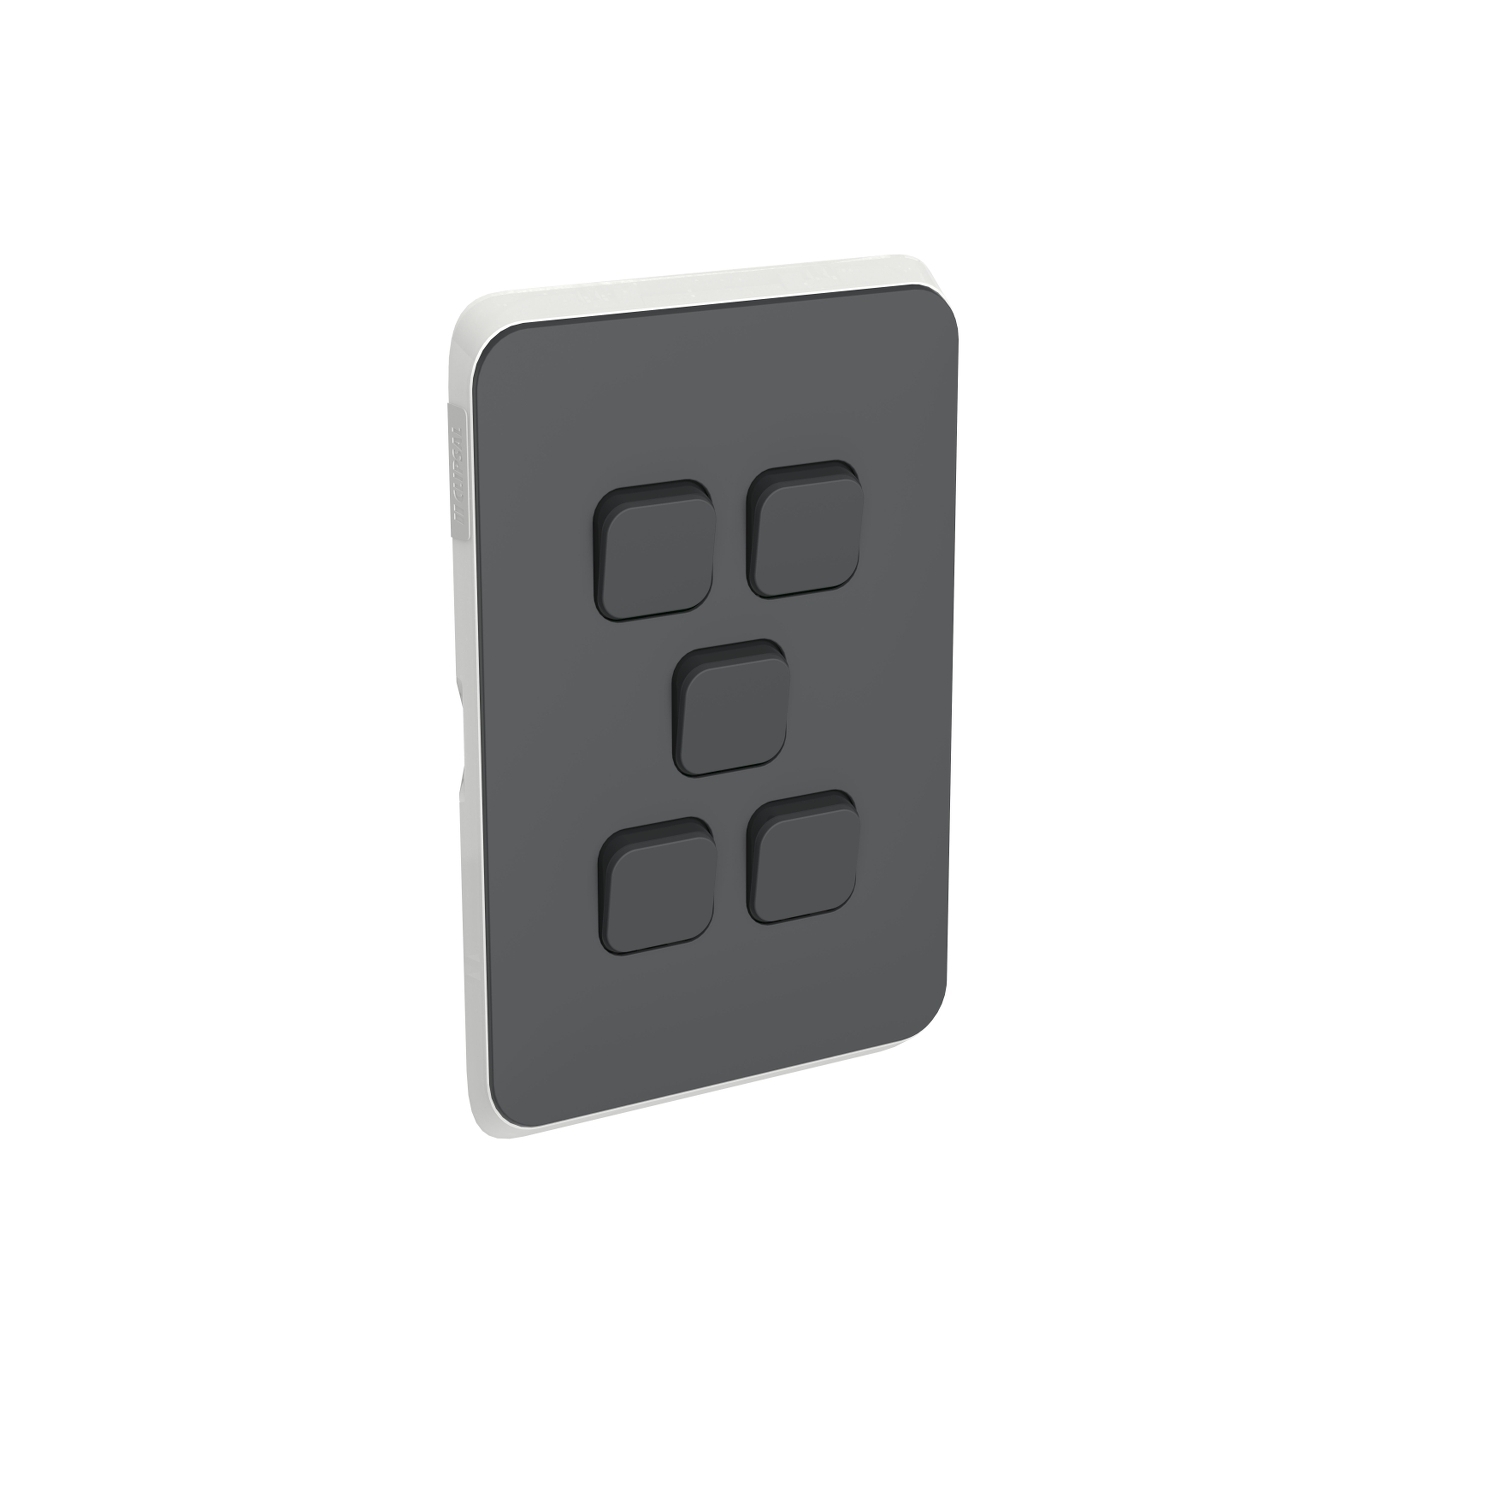 Clipsal Iconic 5 Gang Vertical/Horizontal SKIN Cover ONLY - Anthracite 3045C-AN